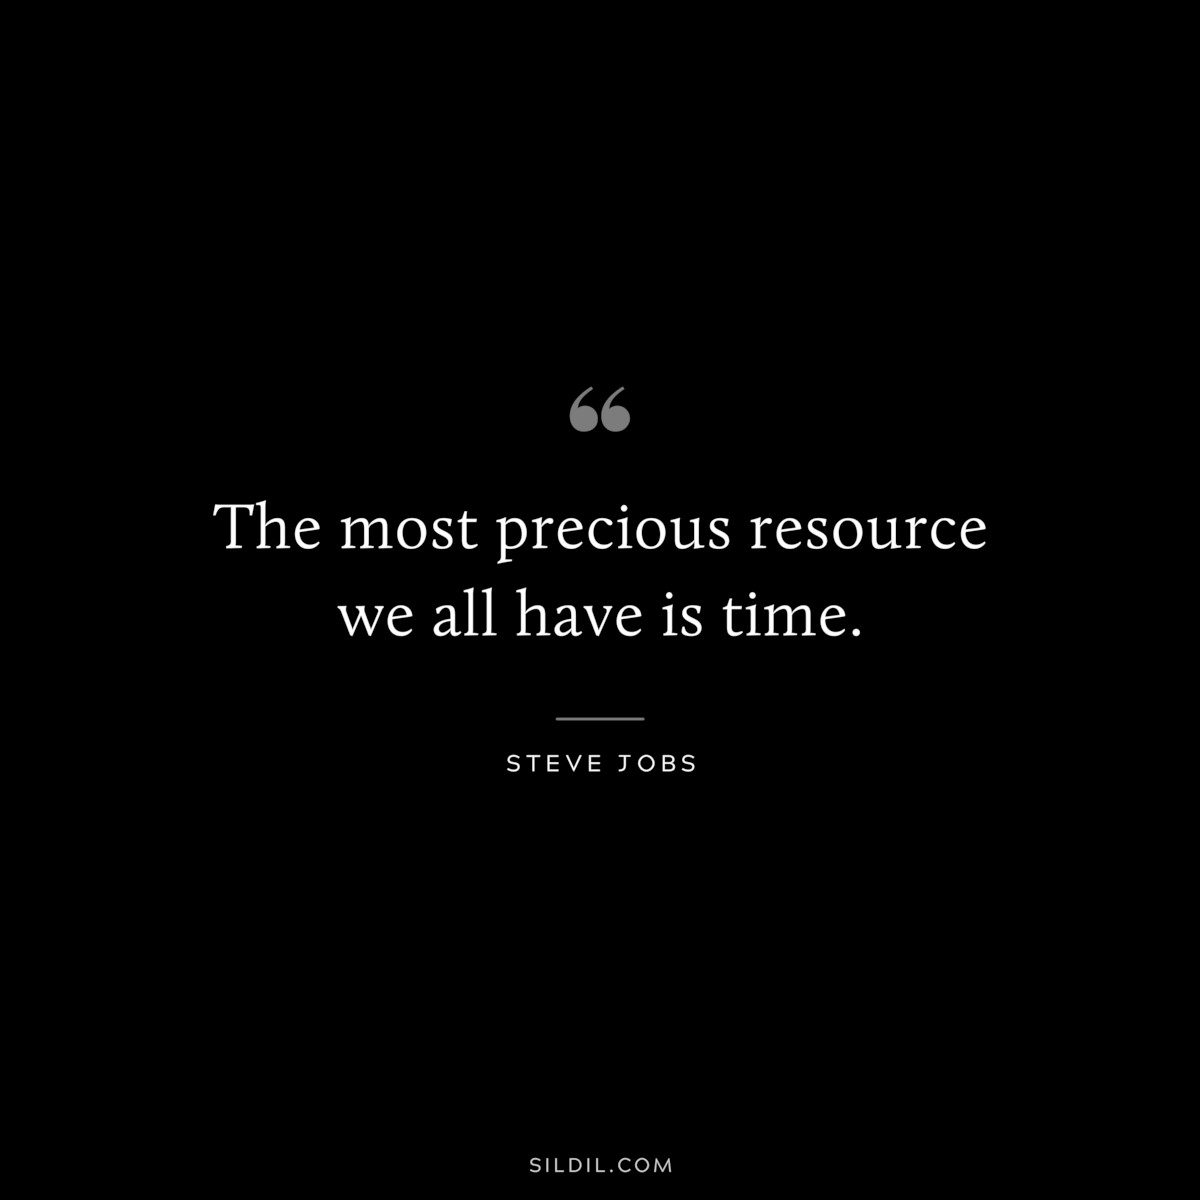 The most precious resource we all have is time. ― Steve Jobs